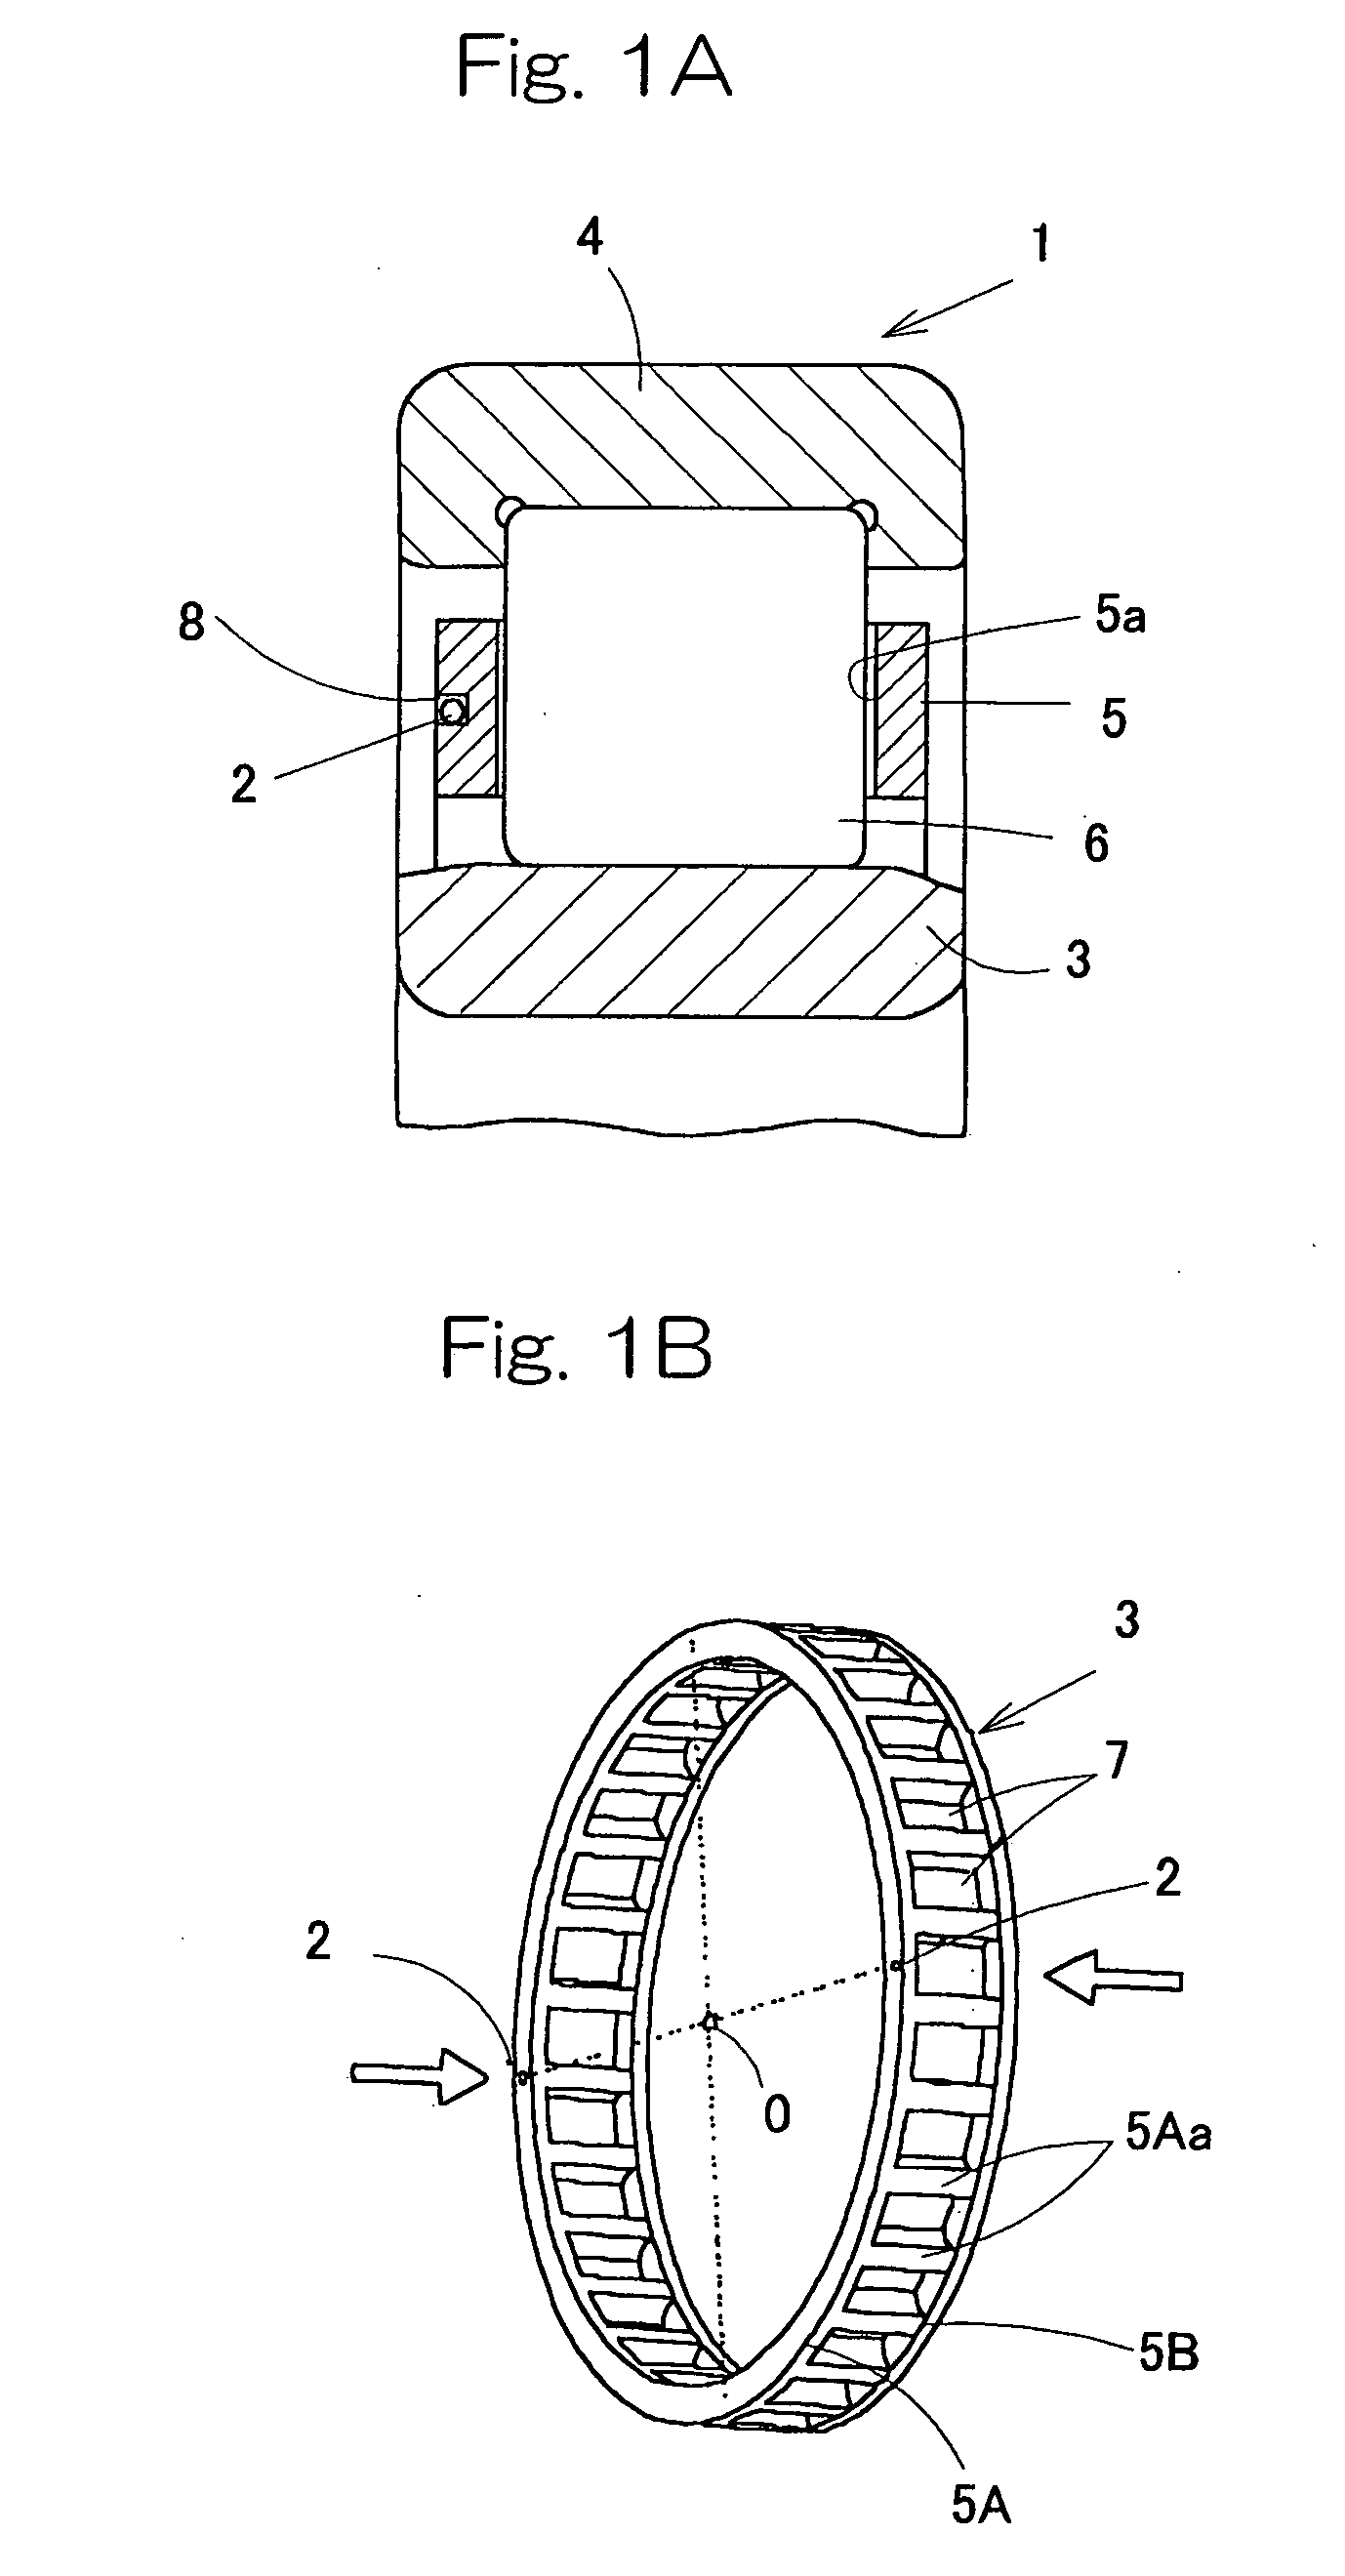 Machine element part with ic tag